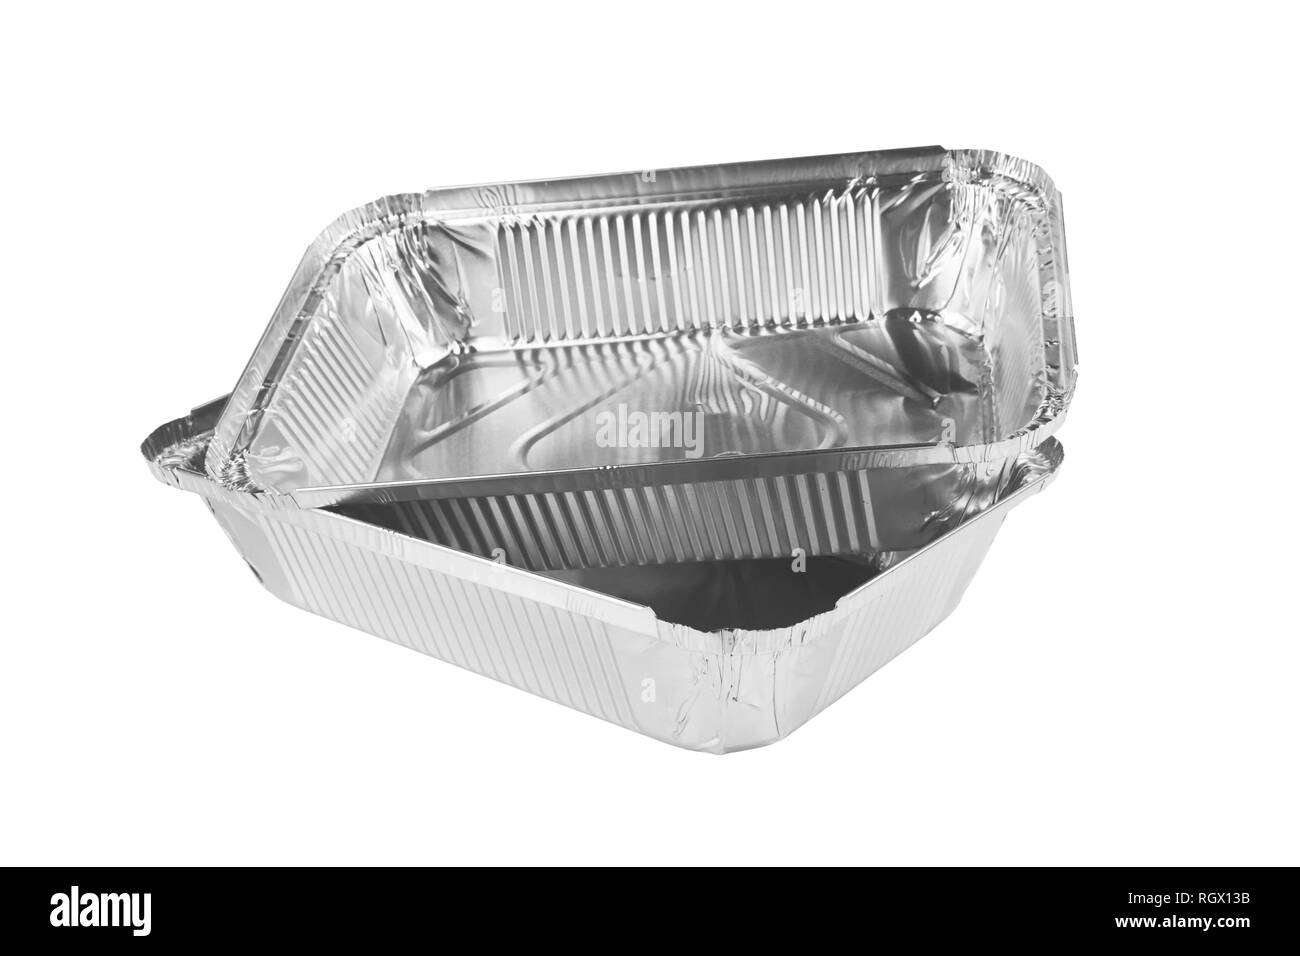 Foil trays for food on a white background Stock Photo